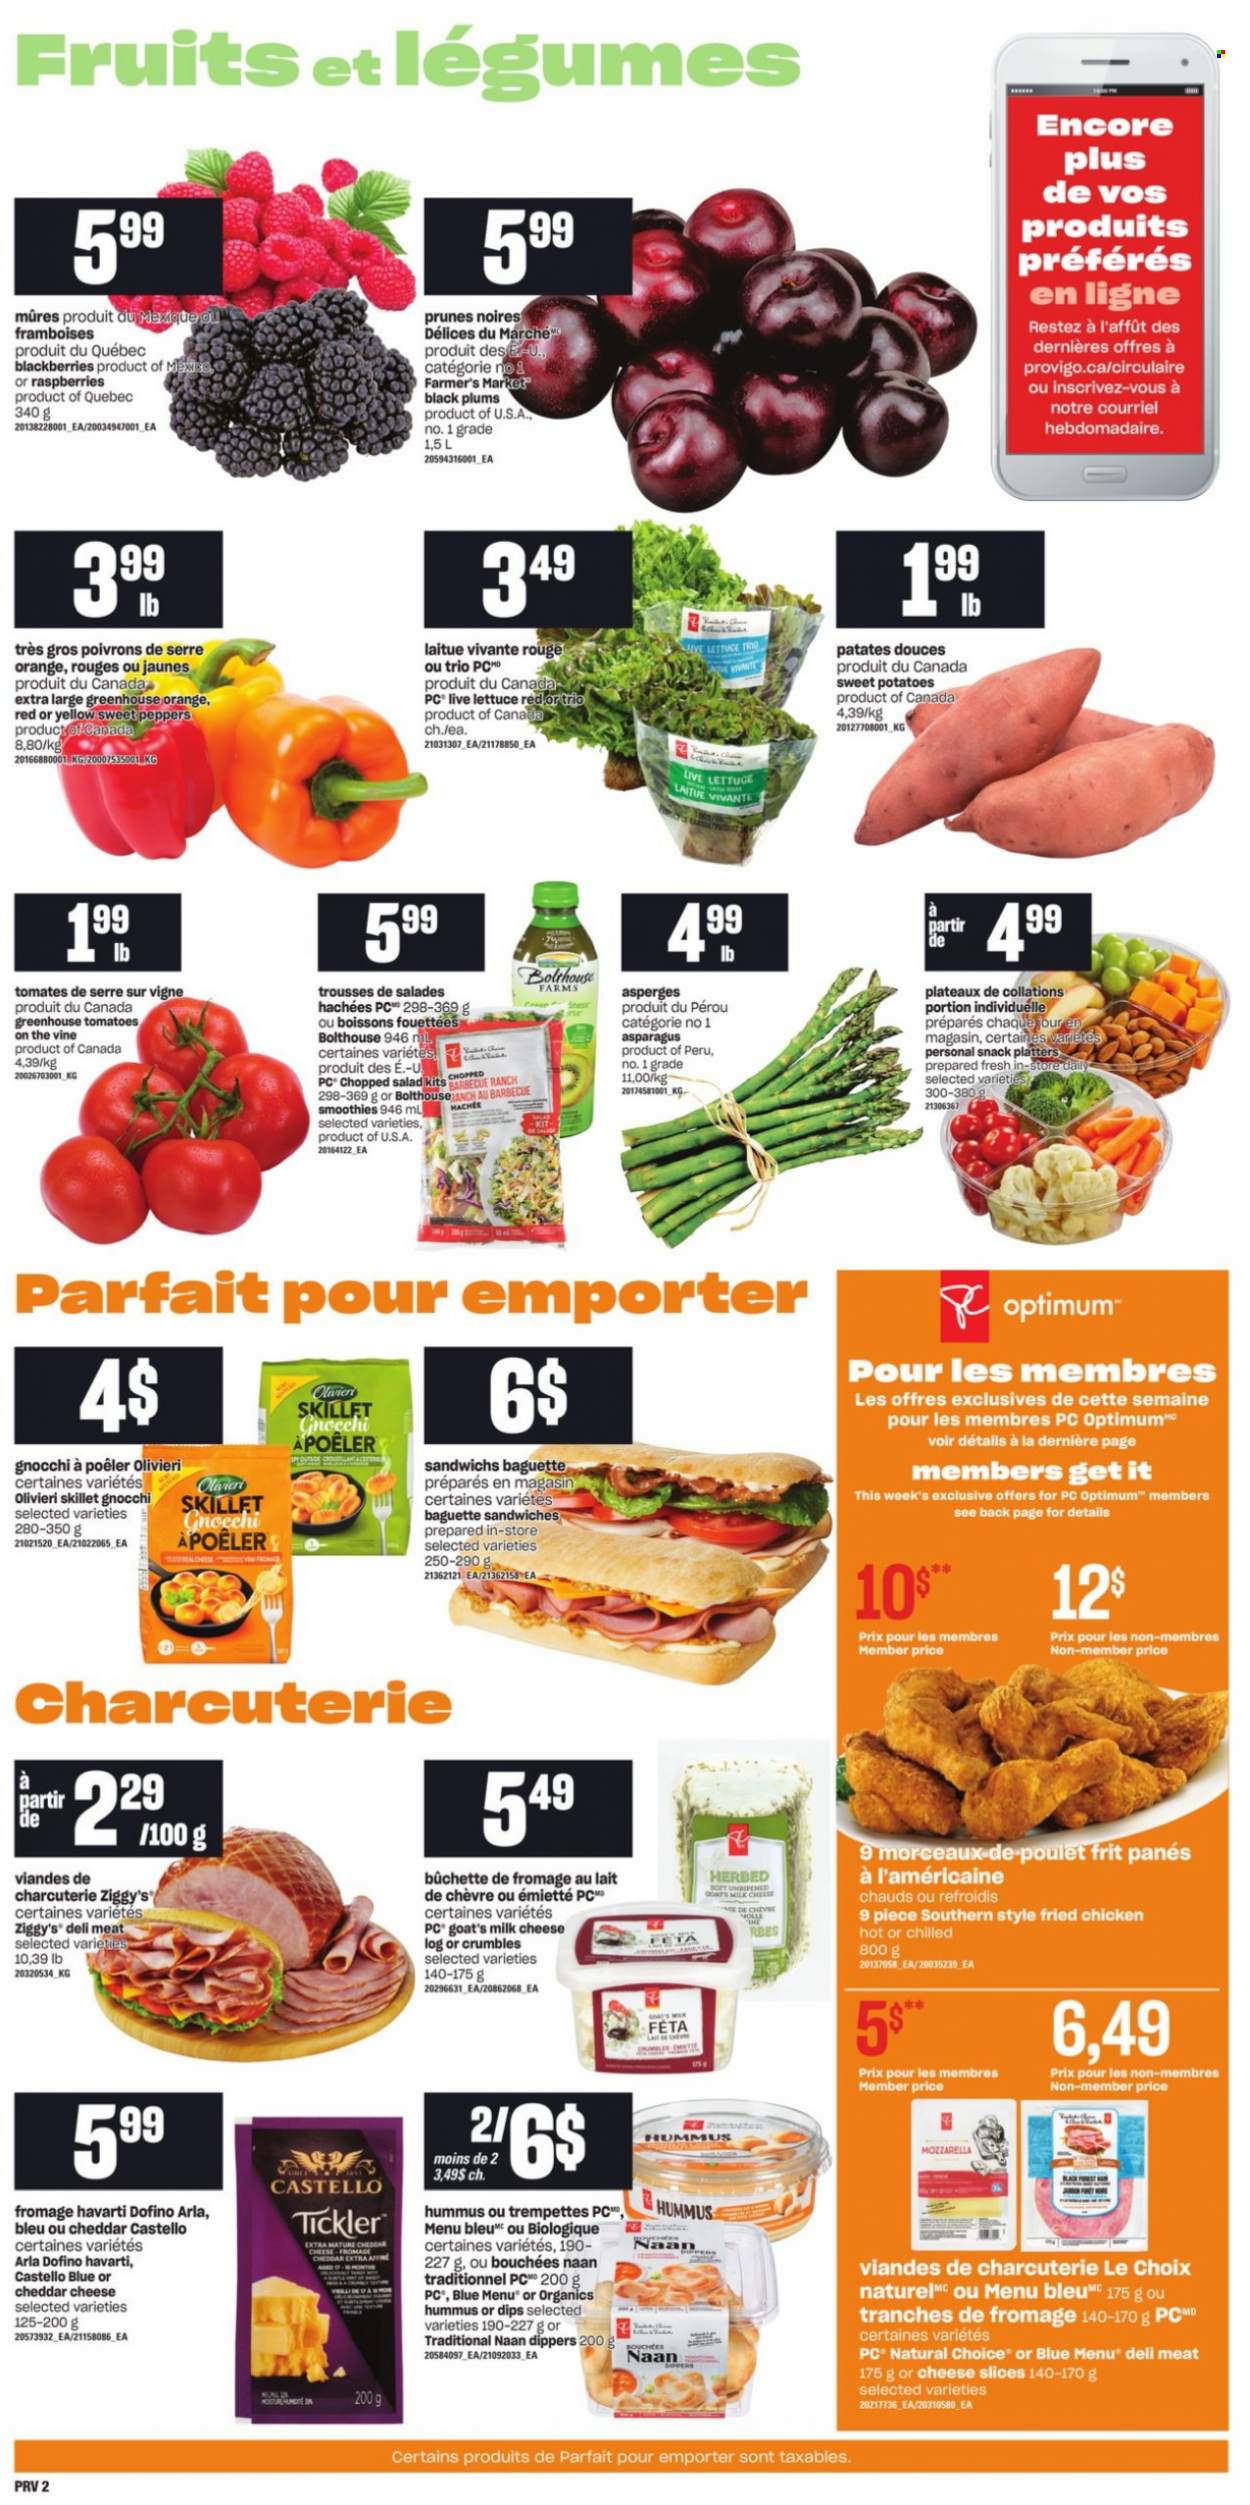 thumbnail - Provigo Flyer - October 21, 2021 - October 27, 2021 - Sales products - asparagus, sweet peppers, sweet potato, tomatoes, potatoes, lettuce, salad, peppers, chopped salad, blackberries, plums, black plums, sandwich, fried chicken, hummus, sliced cheese, Havarti, feta, Arla, milk, prunes, dried fruit, smoothie, baguette, gnocchi, mozzarella. Page 3.